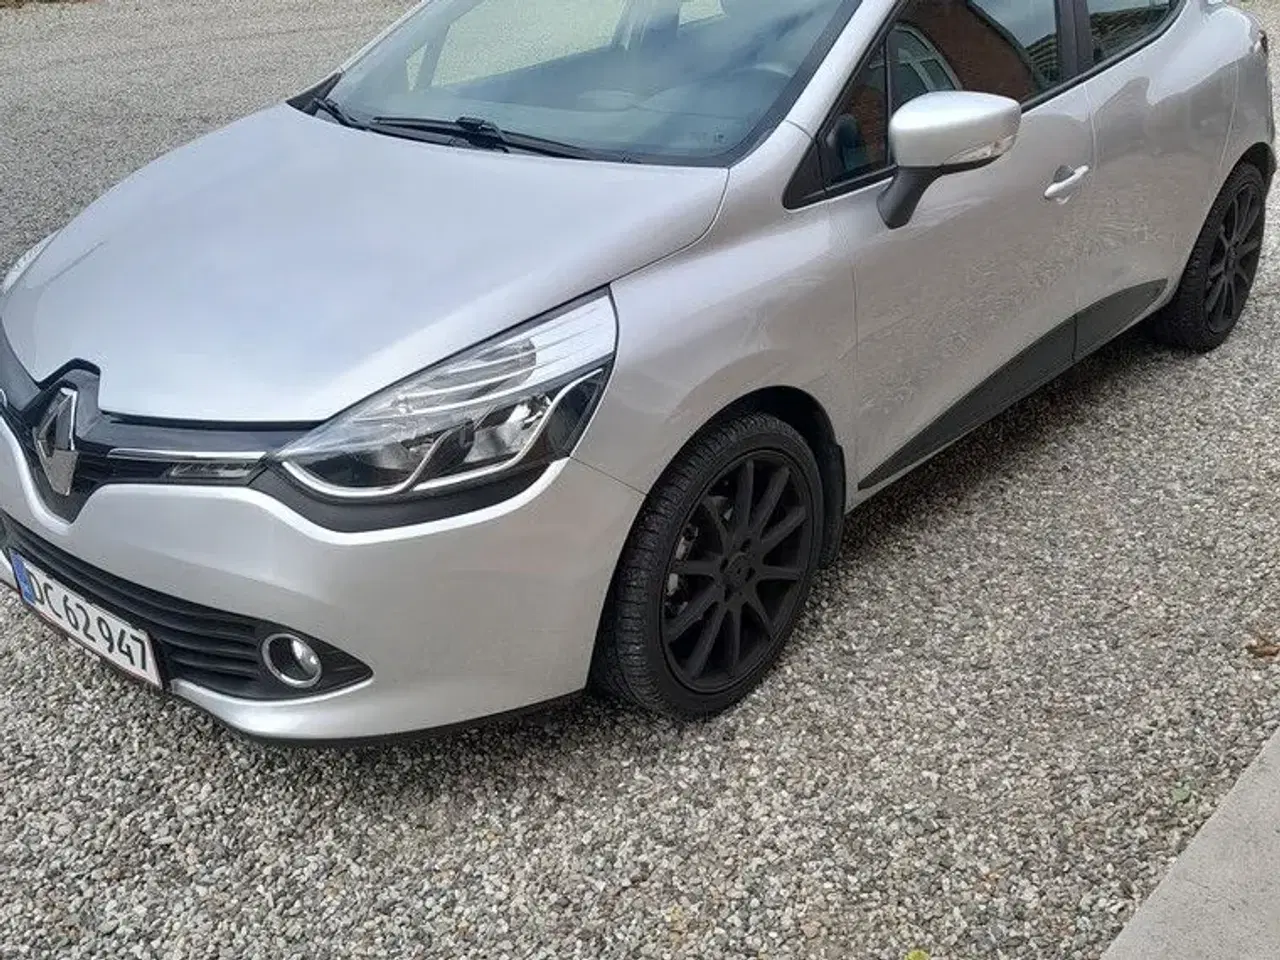 Billede 1 - Renault Ny Clio TCe 90 5d